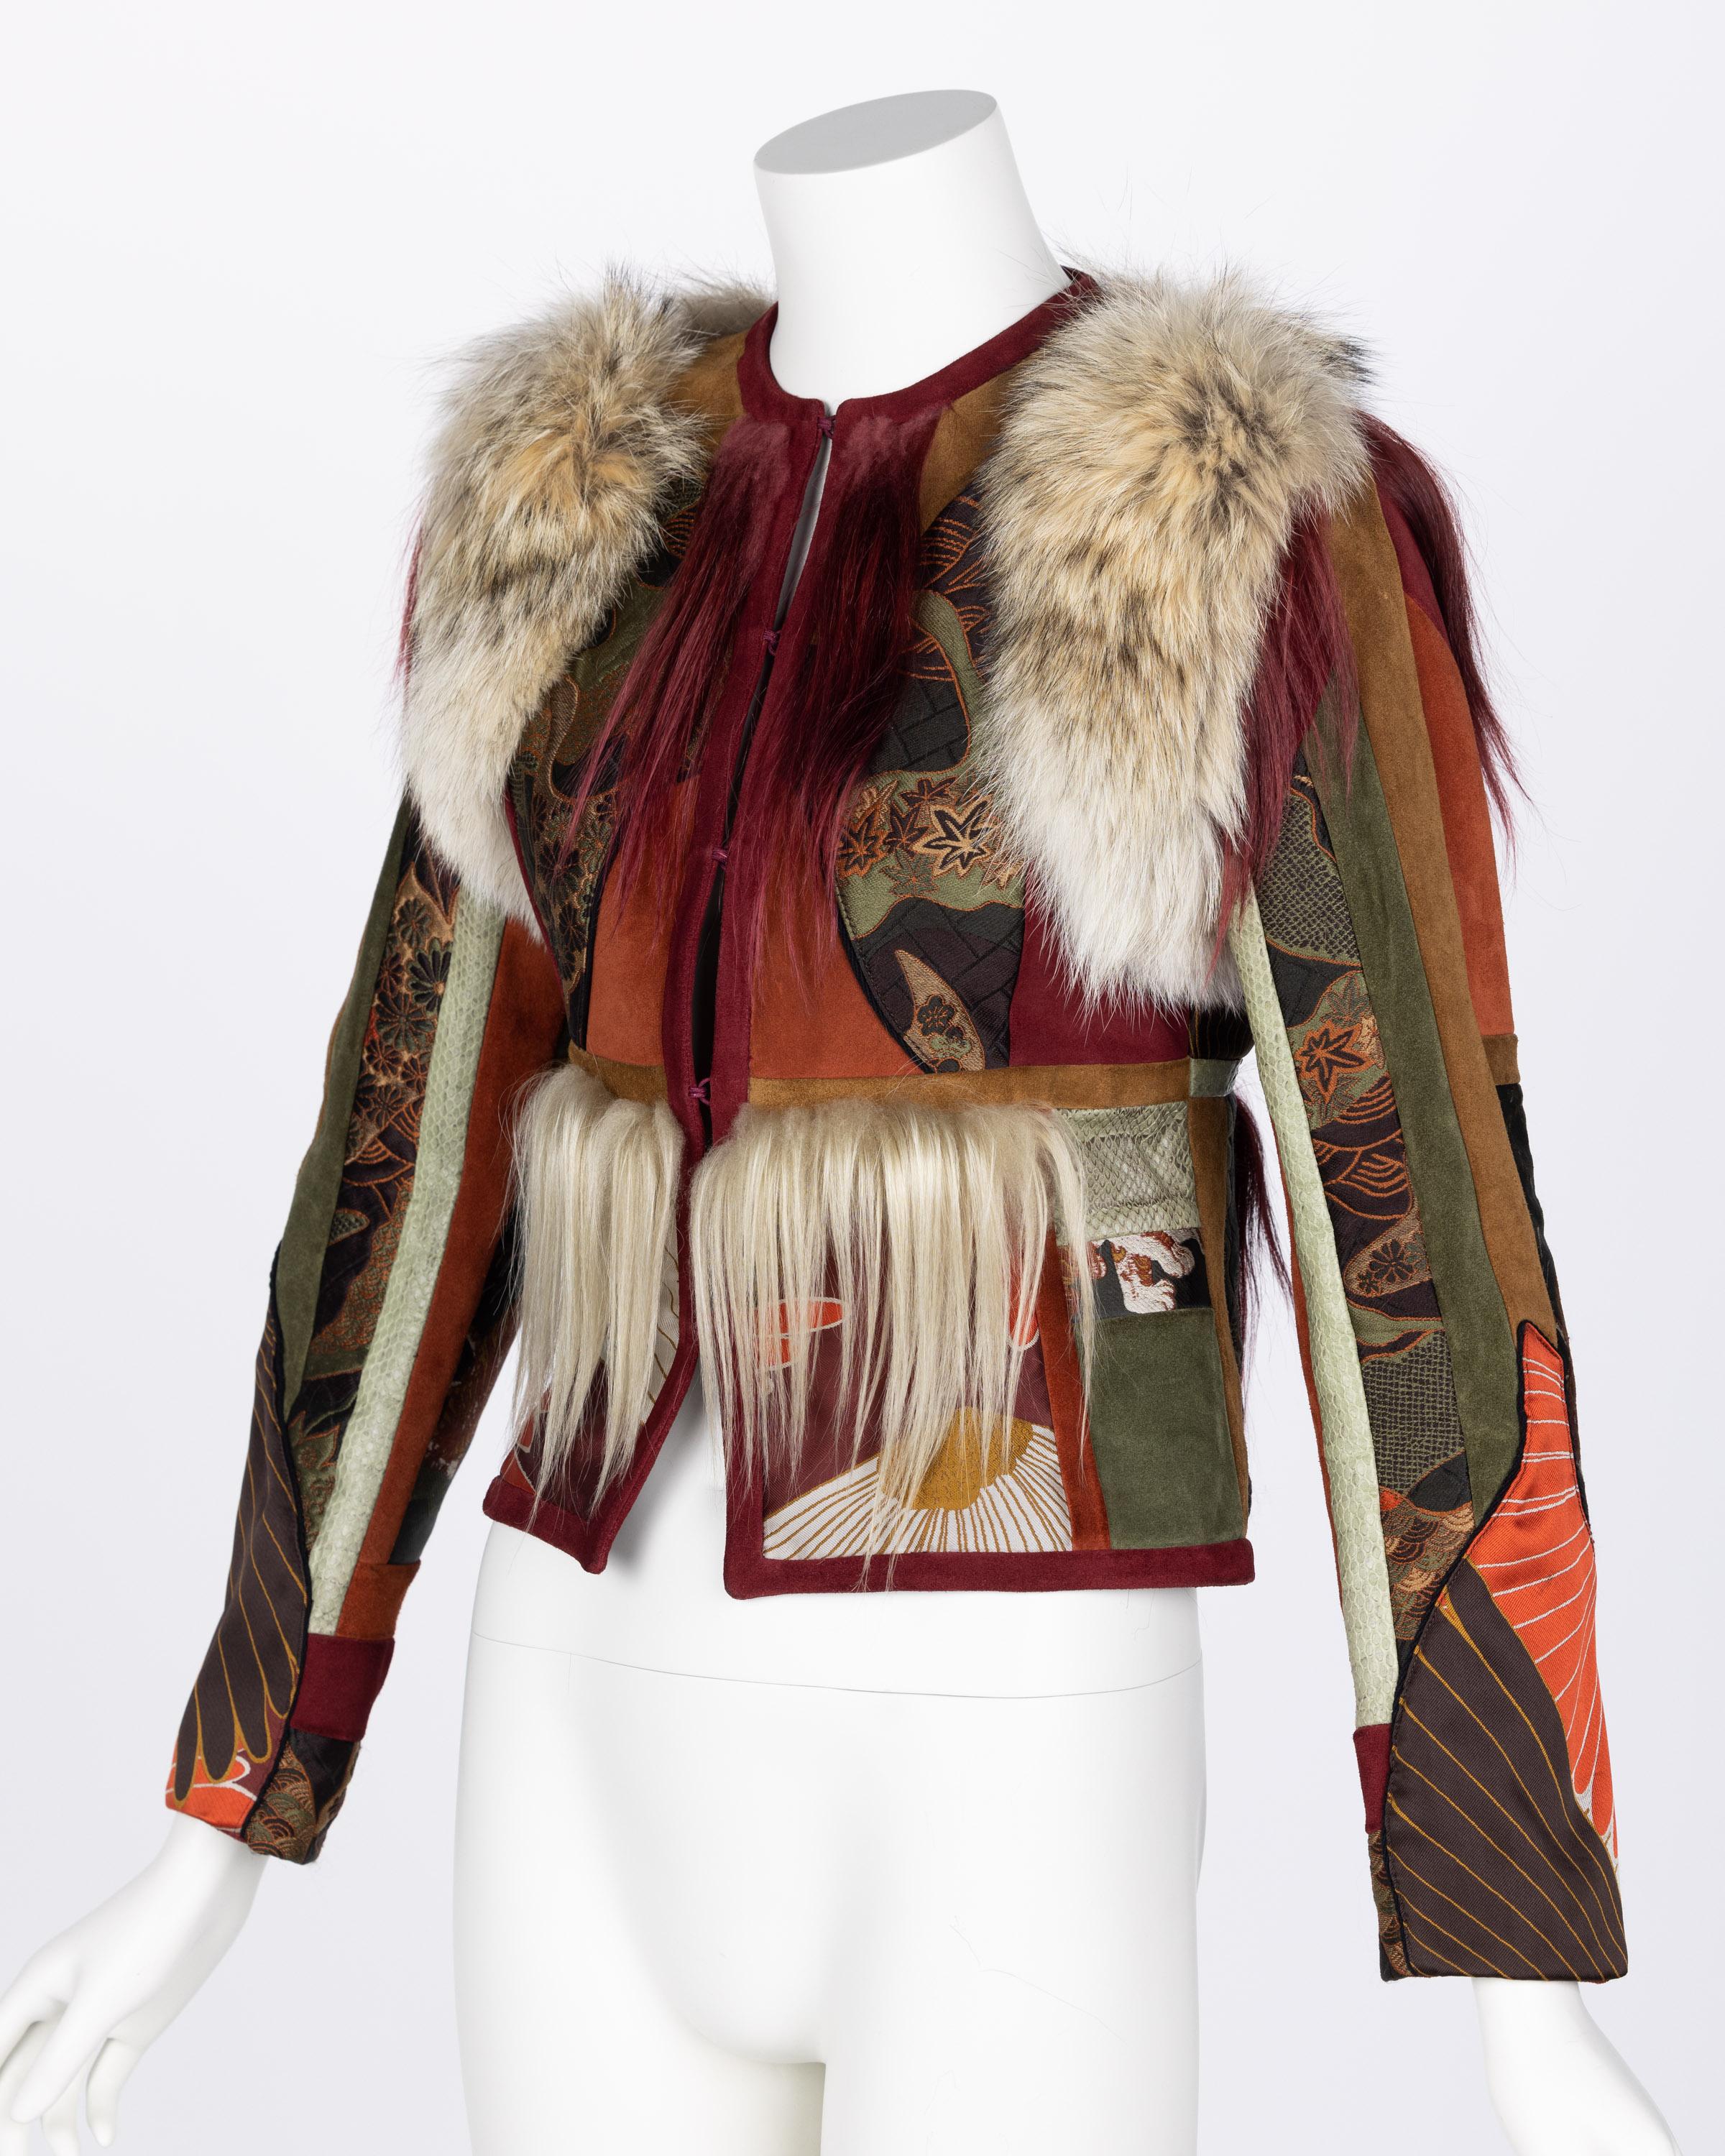 Gucci Tiger Embroidered Suede & Fur Jacket, 2015 In Excellent Condition For Sale In Boca Raton, FL